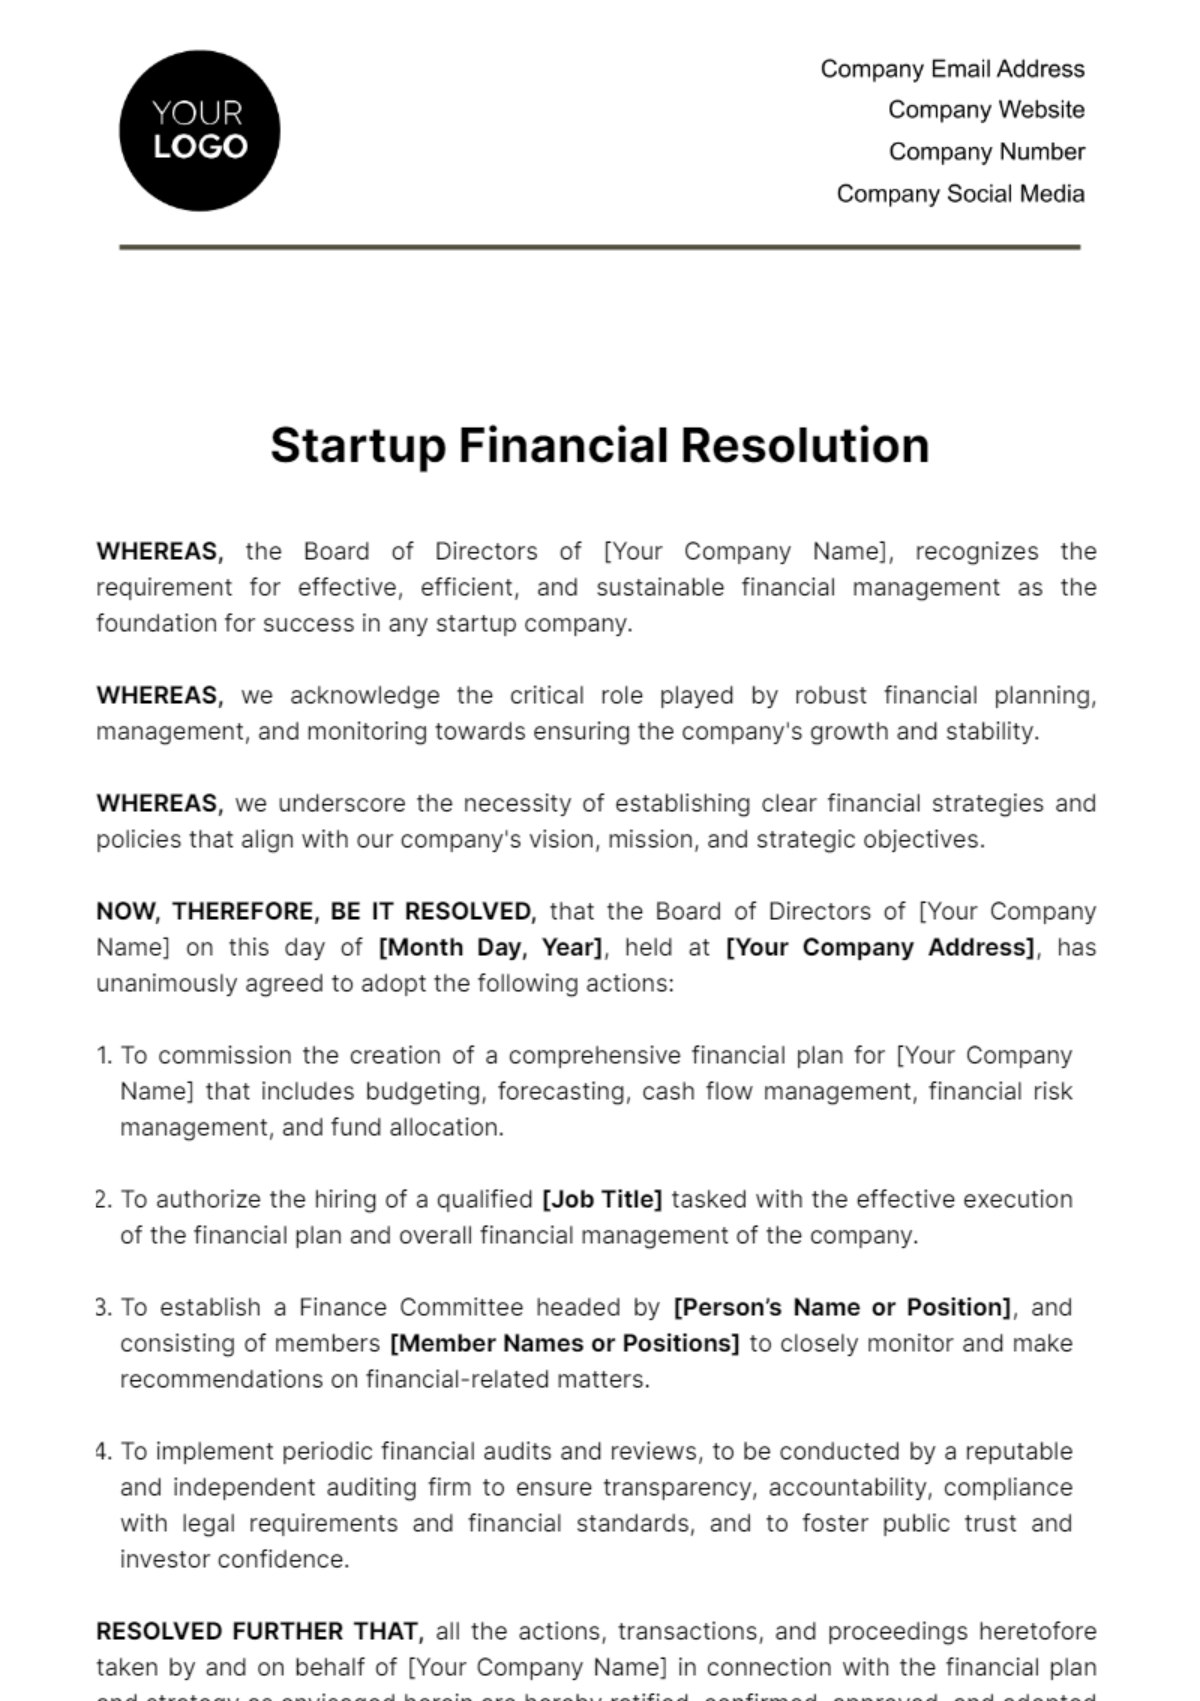 Free Startup Financial Resolution Template